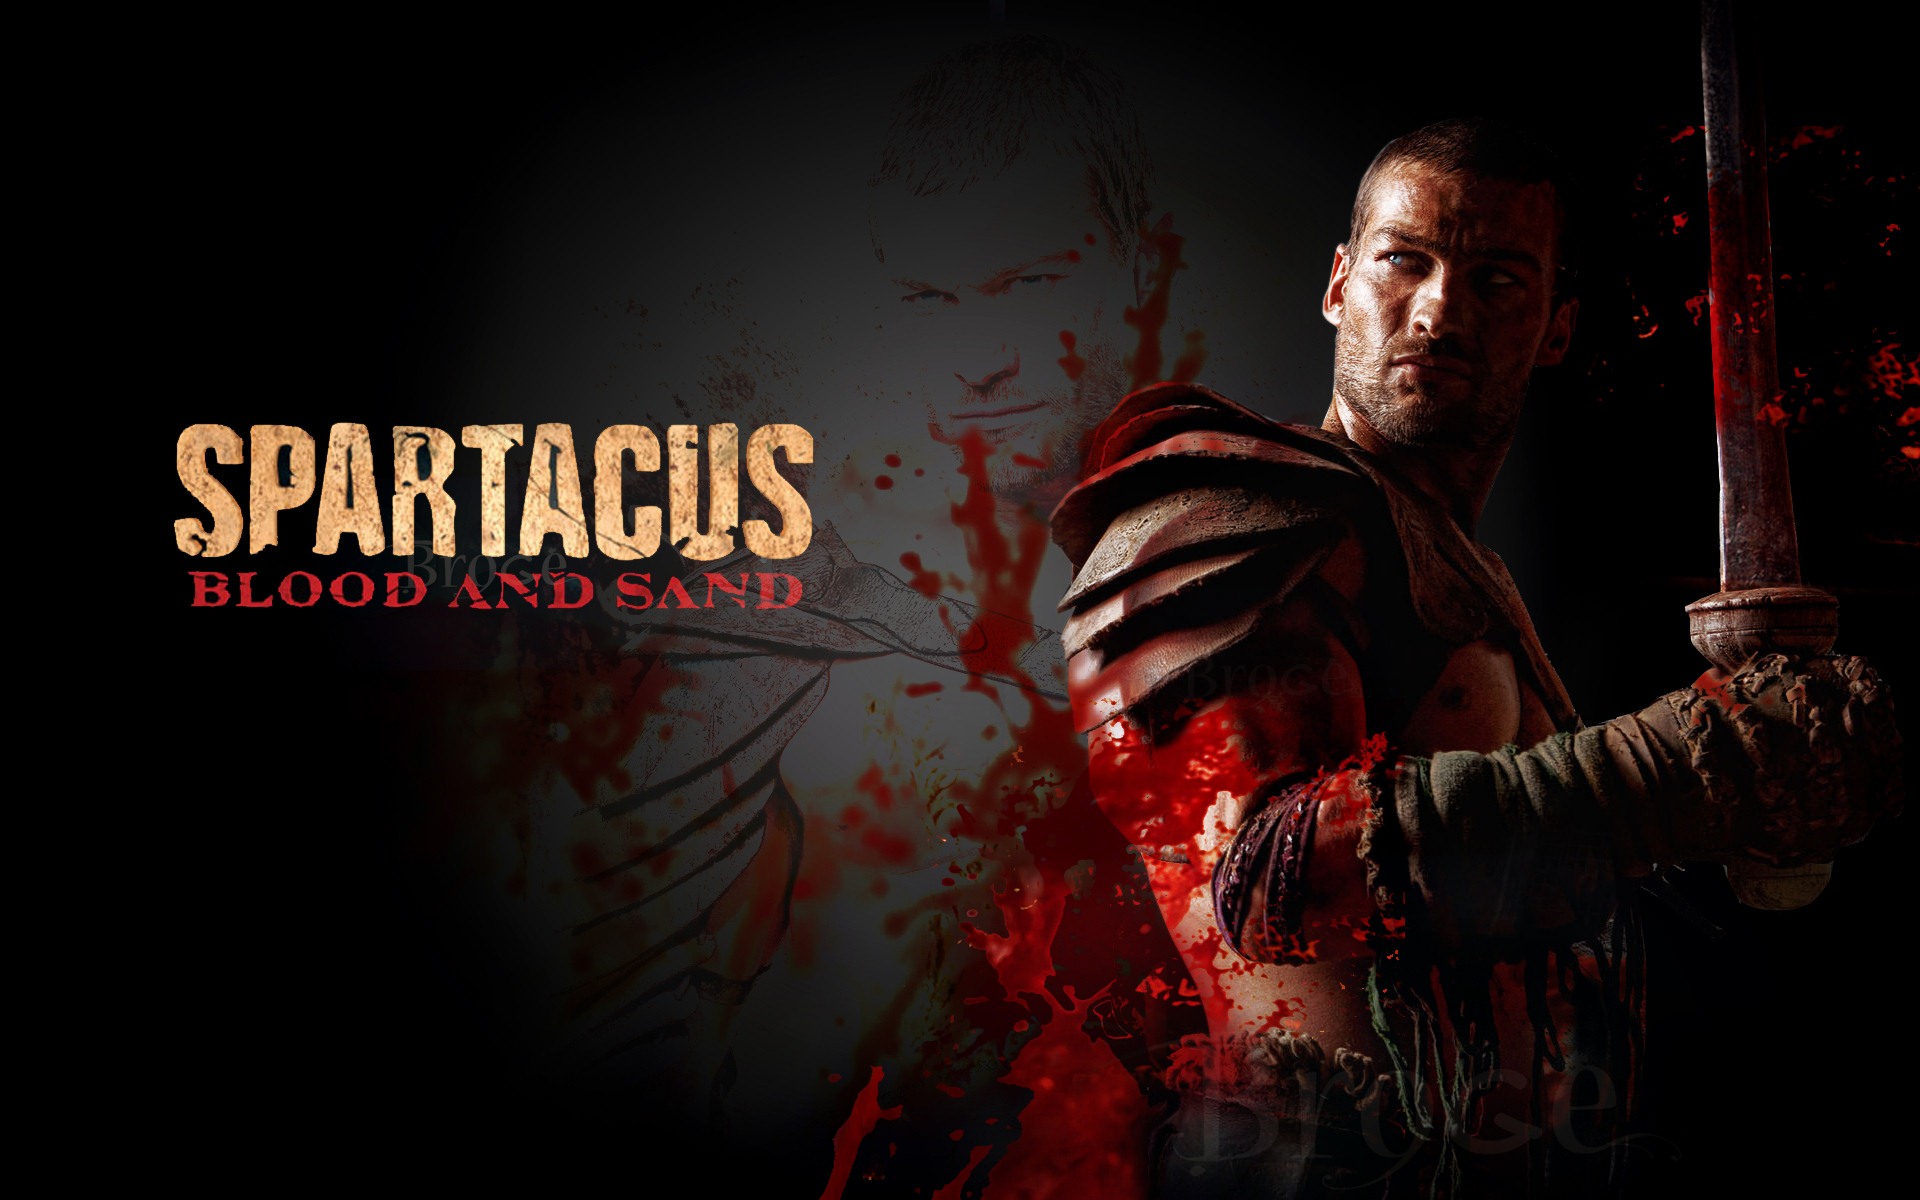 Spartacus: Blood and Sand HD wallpapers #13 - 1920x1200